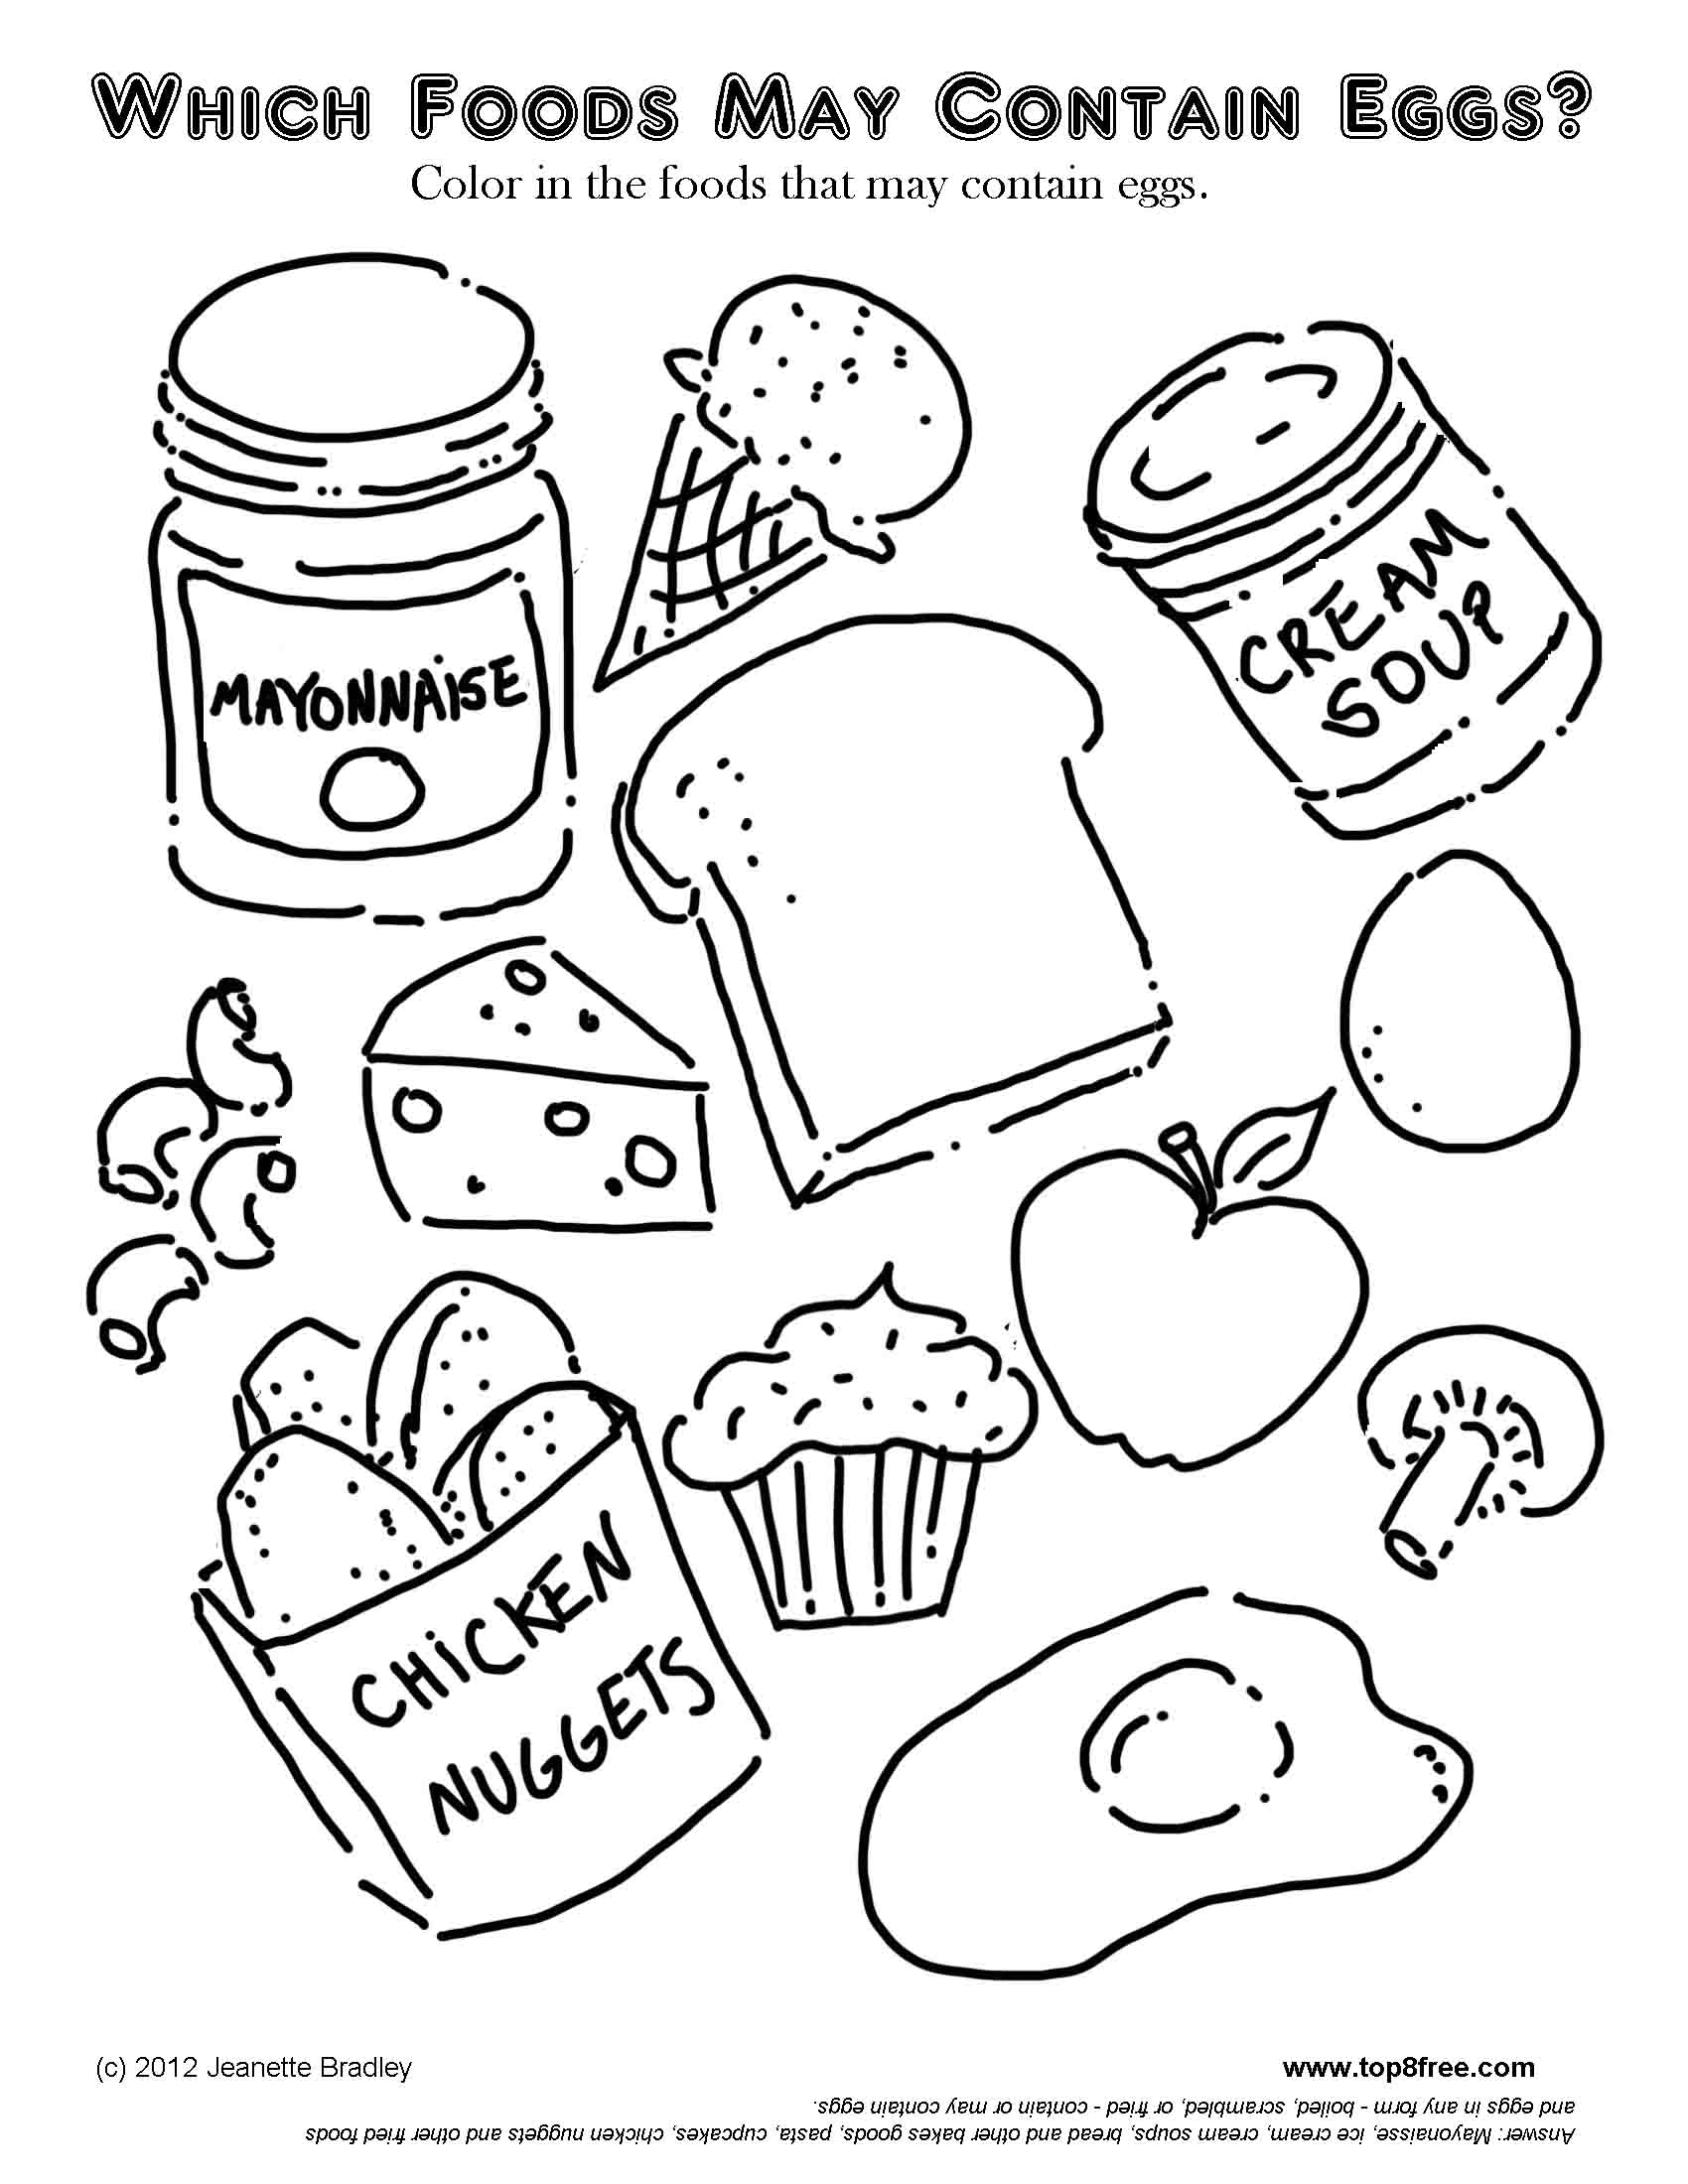 Egg Foods Coloring Page